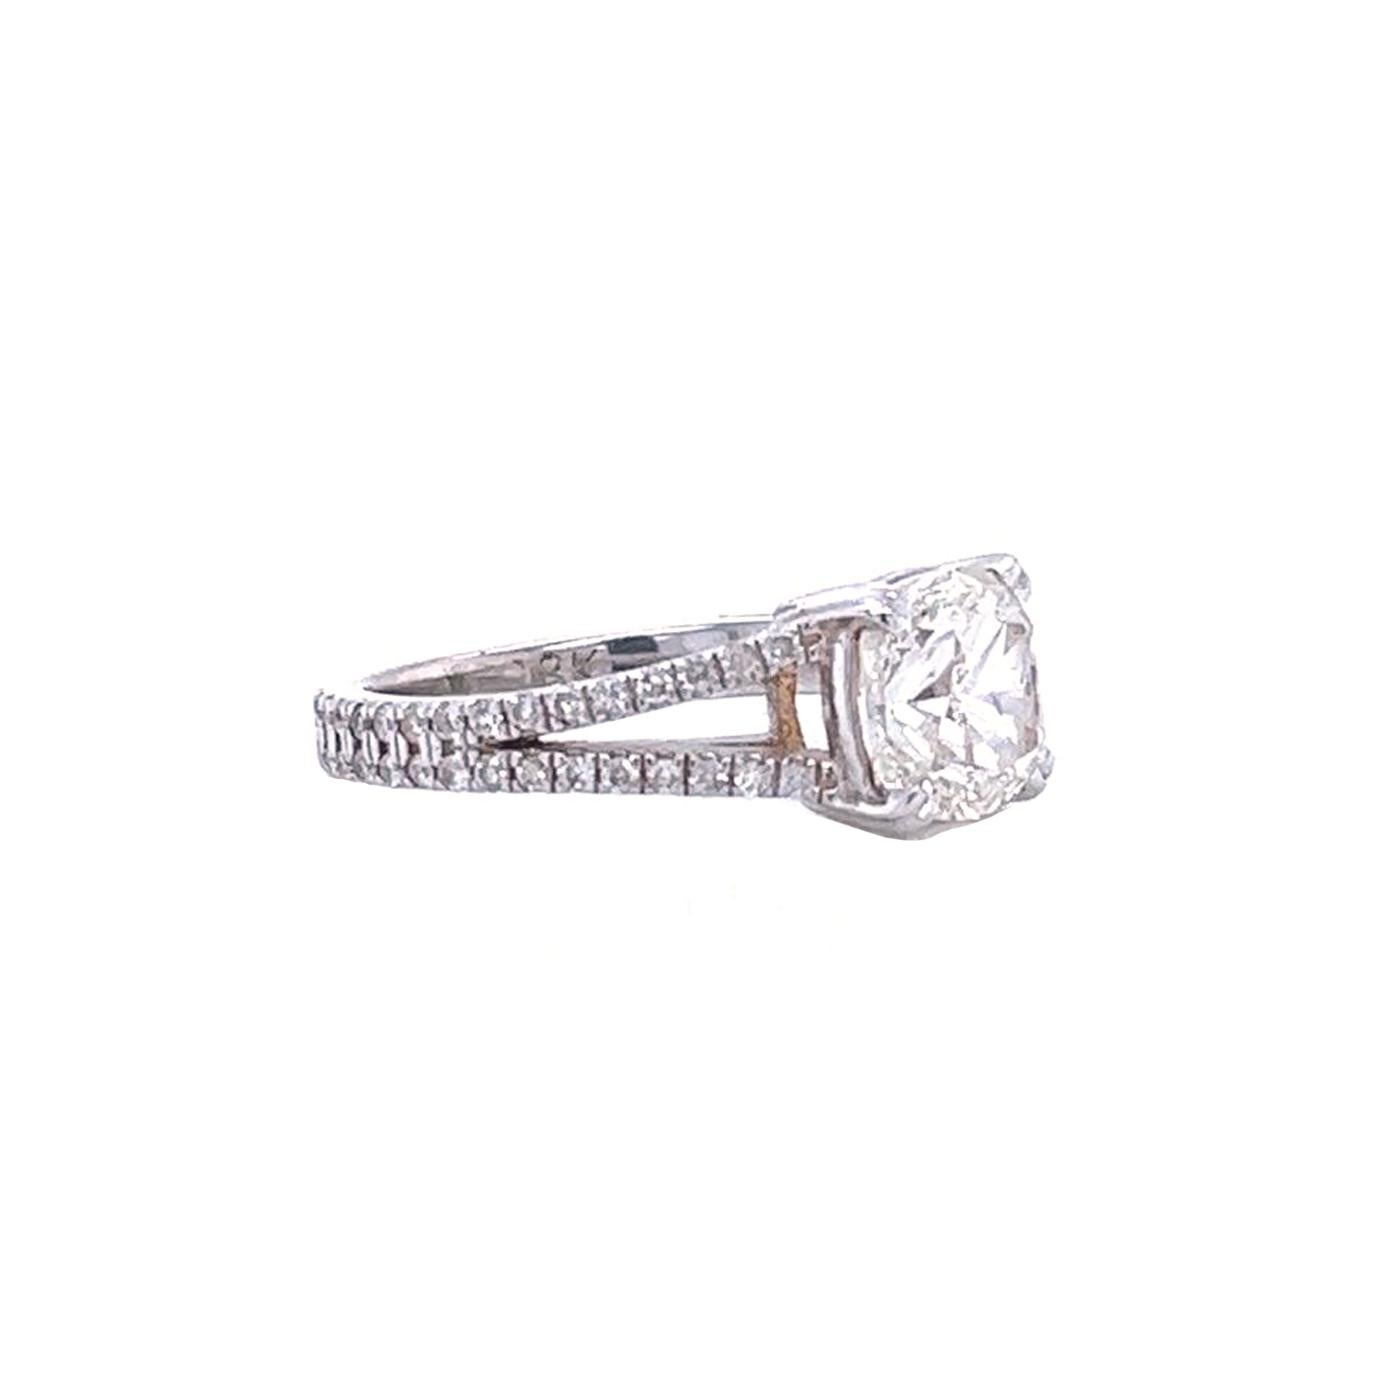 Exceptional GIA Graded 2.02 Carat Cushion Diamond Ring Pave Set 14K White Gold In Good Condition For Sale In Aventura, FL